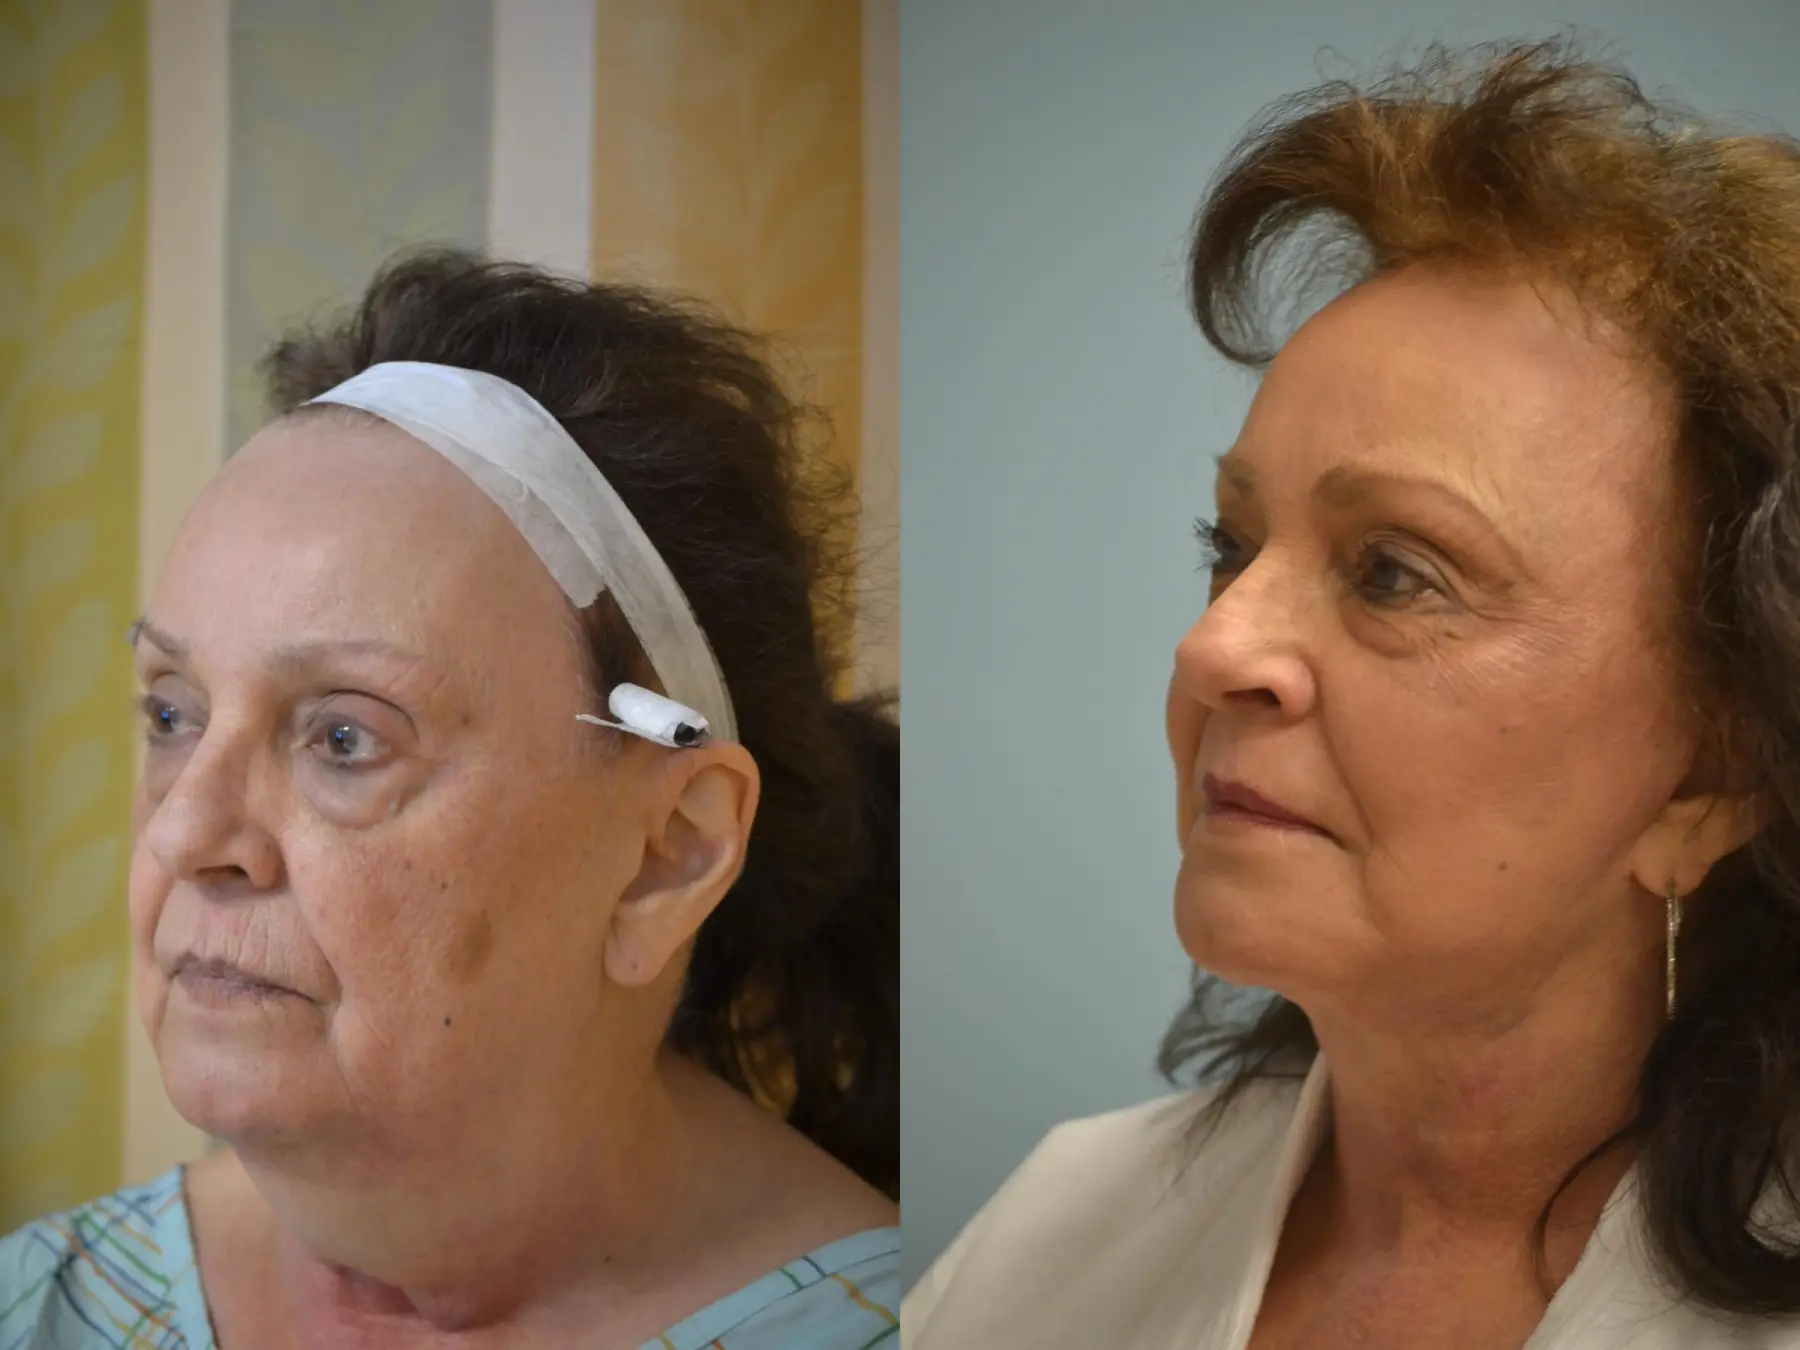 Facelift: Patient 12 - Before and After 3